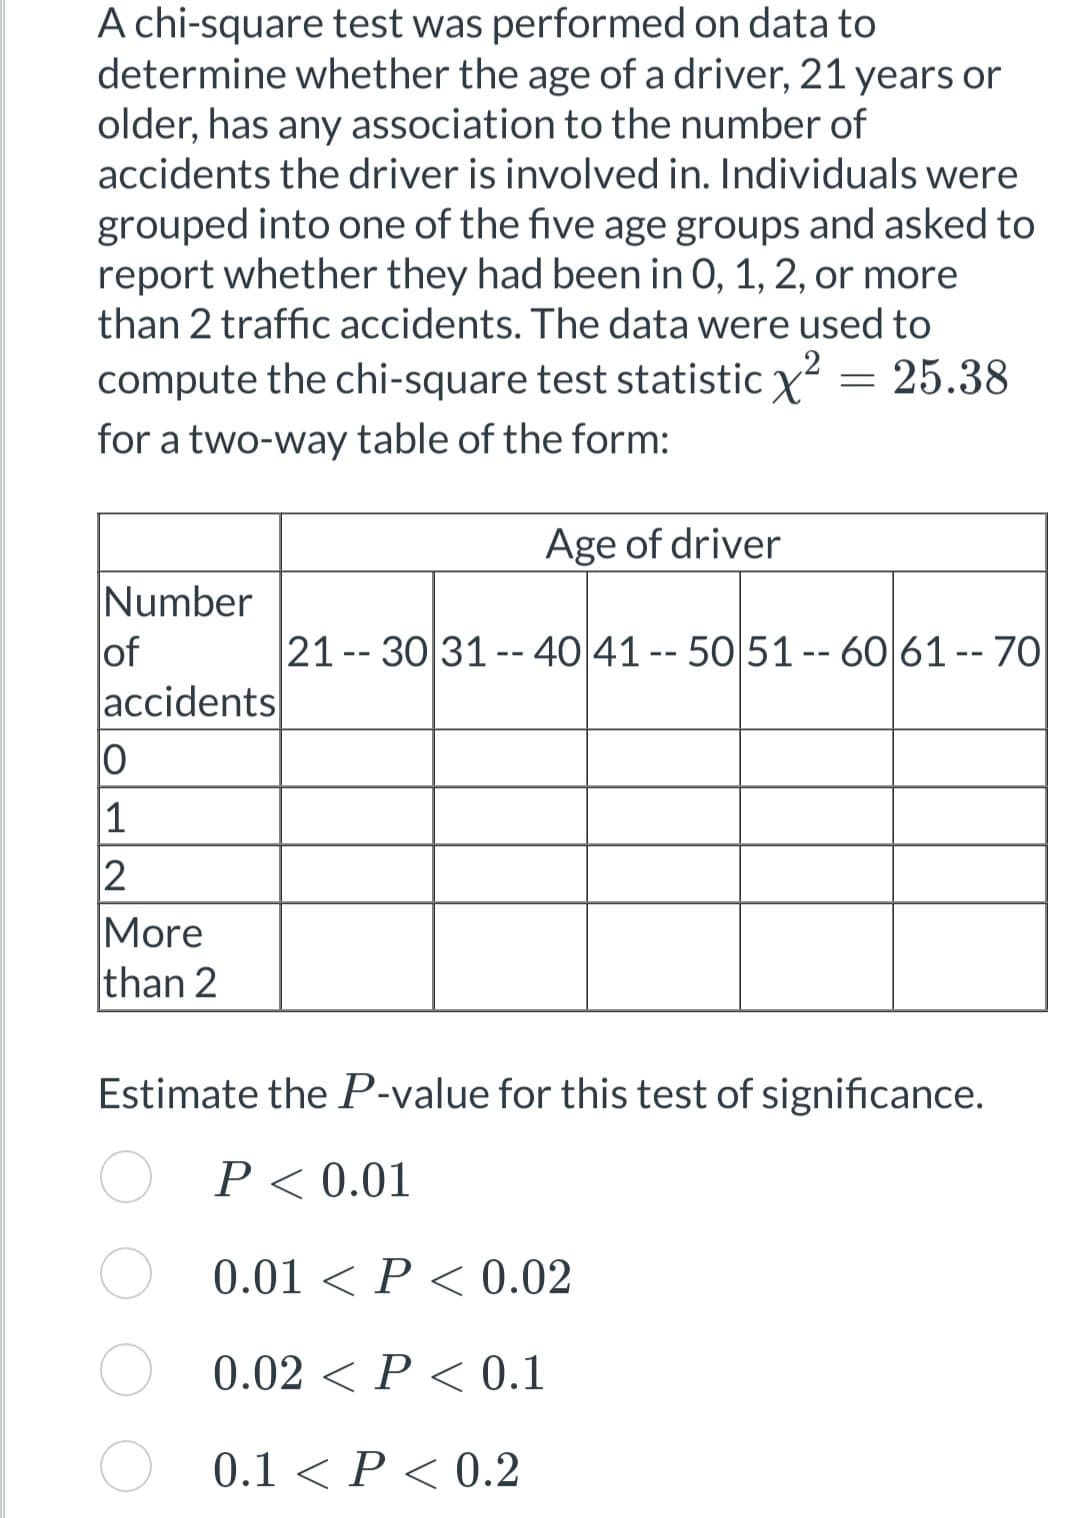 A chi-square test was performed on data to
determine whether the age of a driver, 21 years or
older, has any association to the number of
accidents the driver is involved in. Individuals were
grouped into one of the five age groups and asked to
report whether they had been in 0, 1, 2, or more
than 2 traffic accidents. The data were used to
compute the chi-square test statistic x² = 25.38
for a two-way table of the form:
Number
of
accidents
0
|1
12
More
than 2
Age of driver
21-30 31-40 41-50 51-60 61-70
Estimate the P-value for this test of significance.
P < 0.01
0.01 < P < 0.02
0.02 P < 0.1
0.1 < P < 0.2